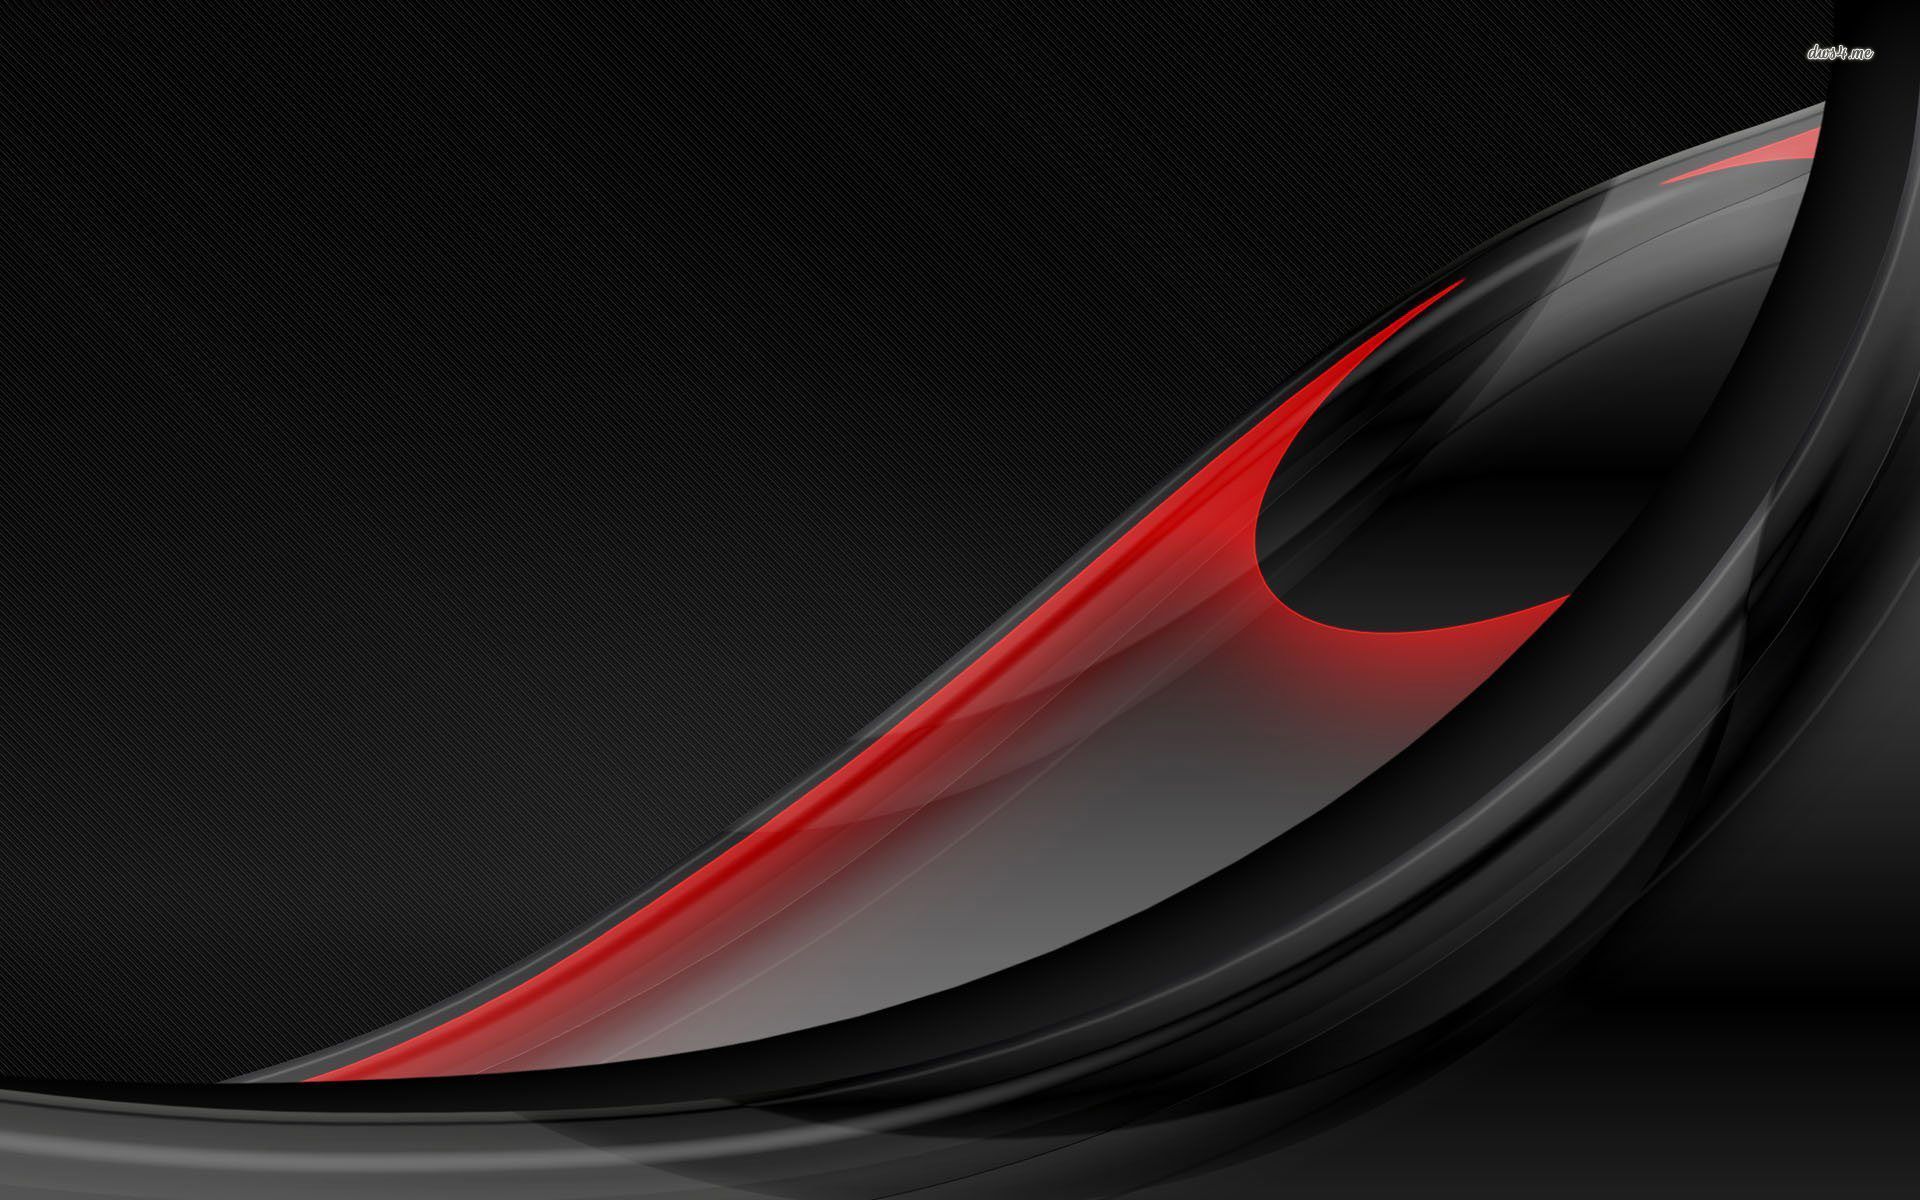 Black And Red Feather Abstract Desktop Wallpaper